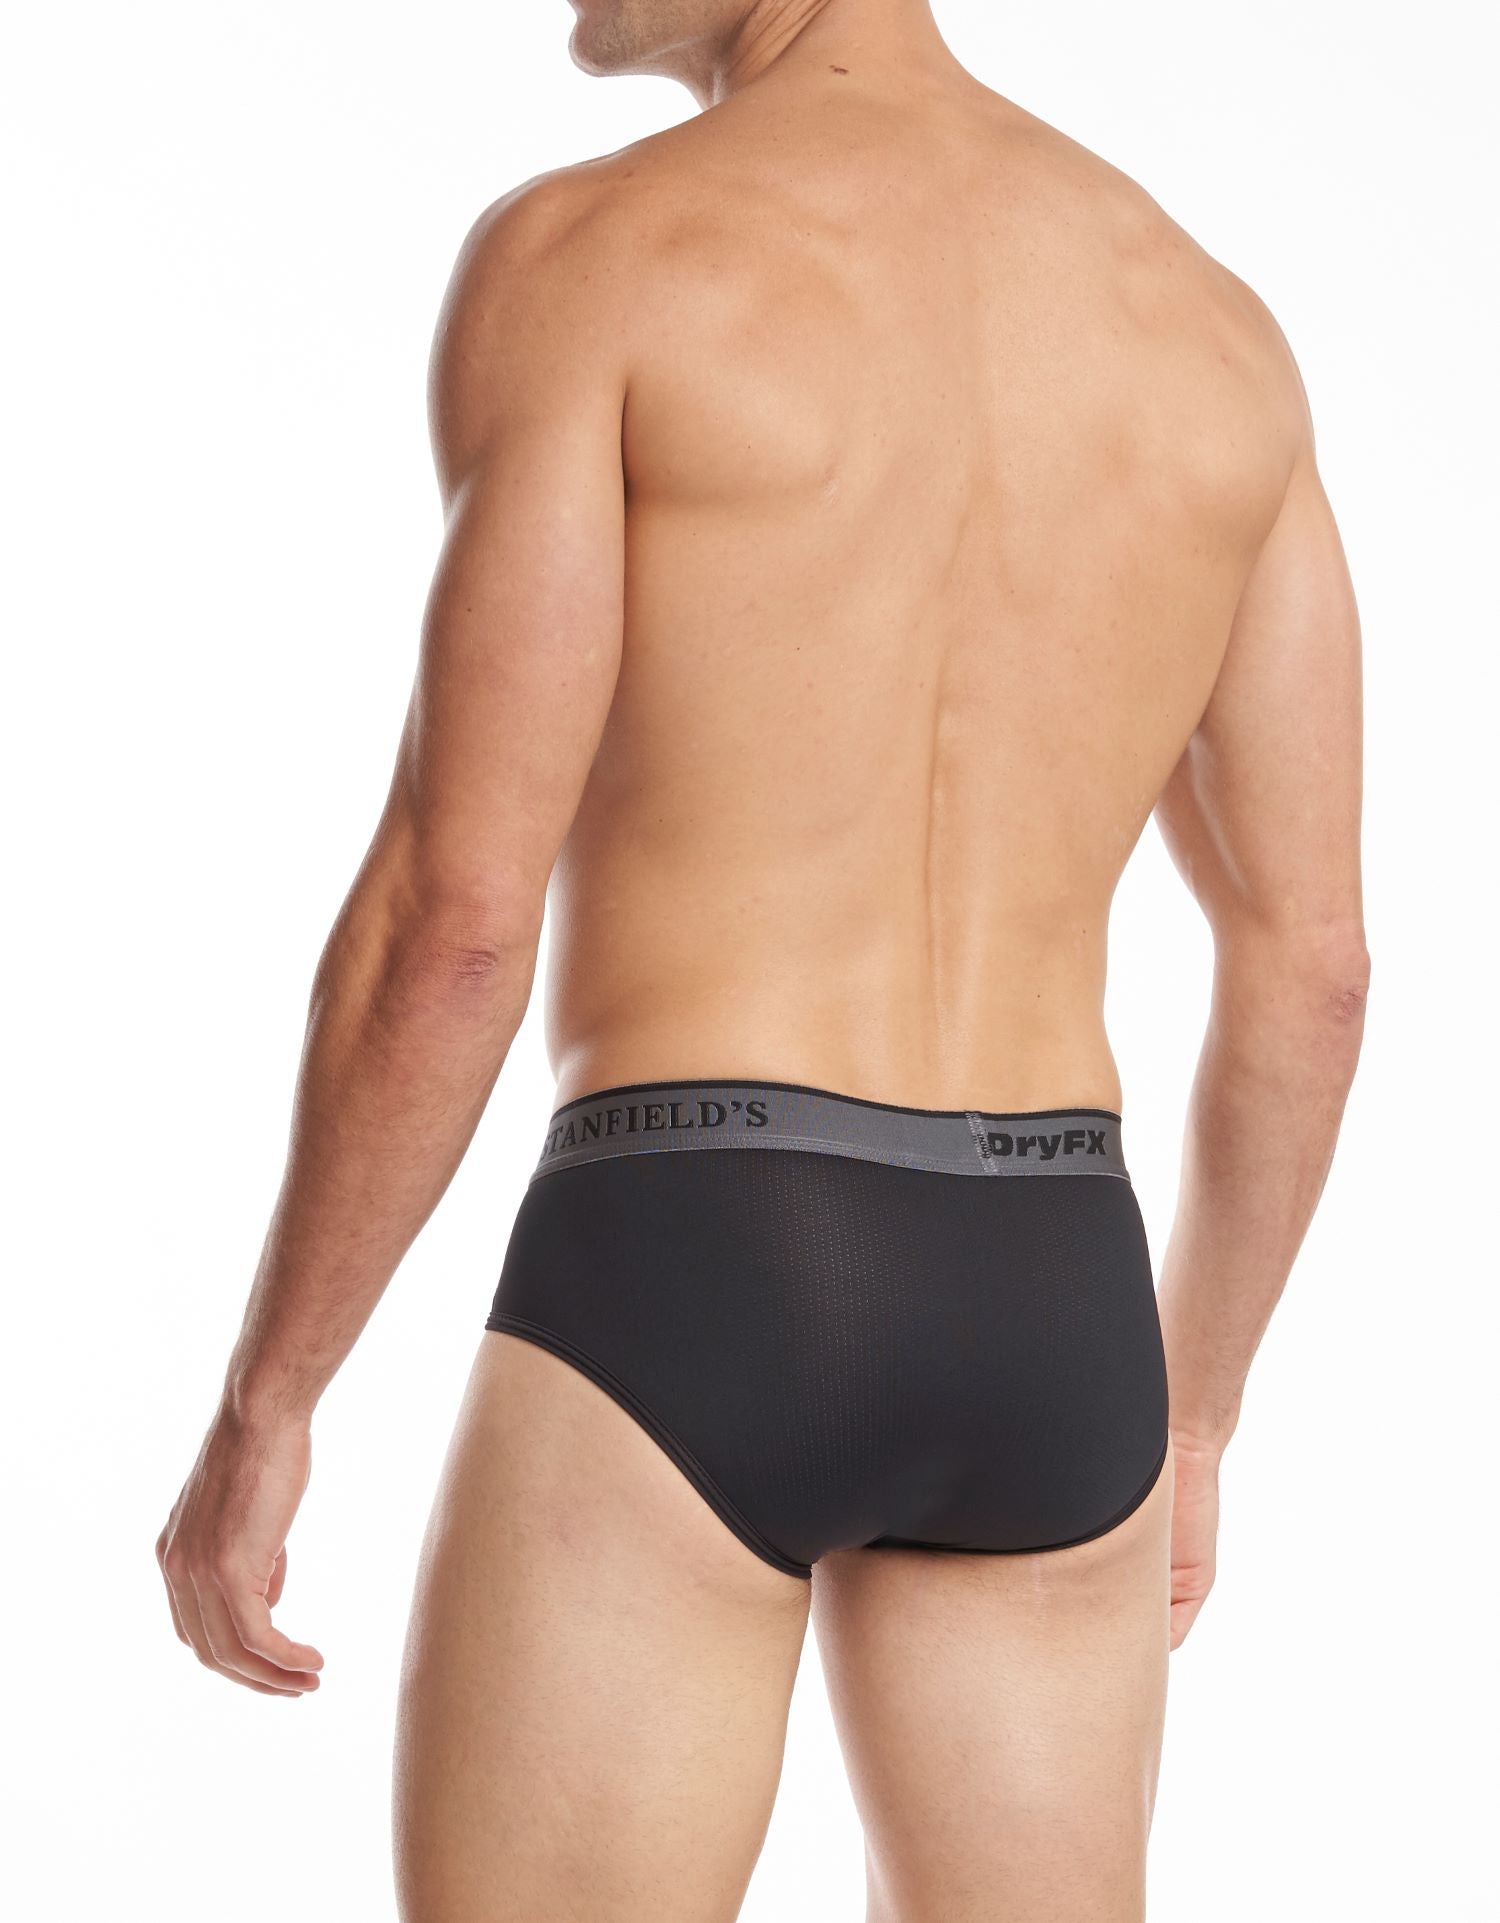 Men's Boxer Brief DryFX Collection (Cooling)